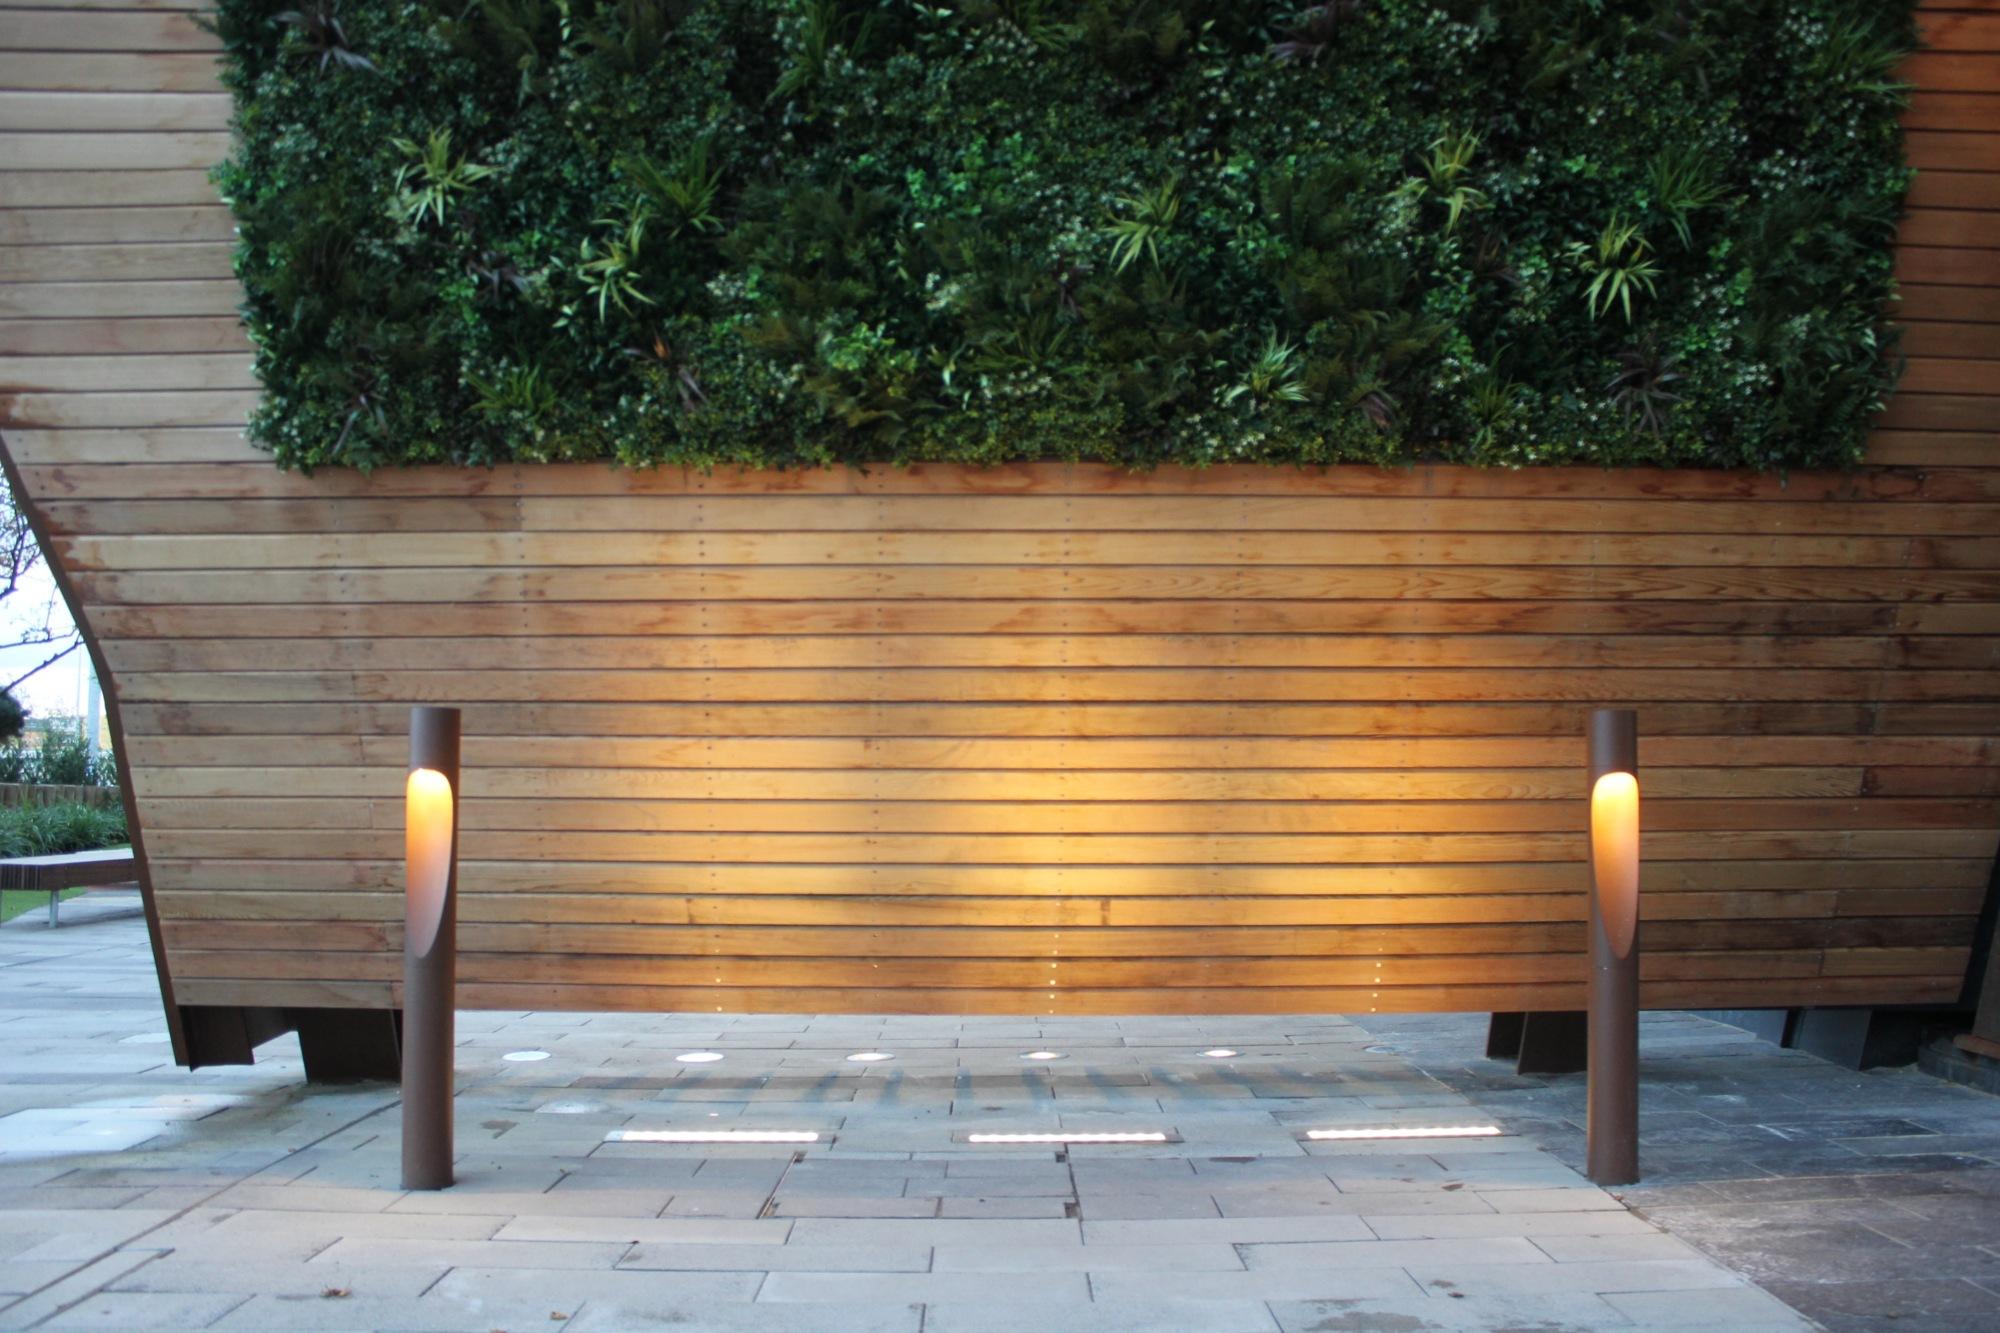 Large 'Flindt Garden' Outdoor Bollard Light in Corten Red for Louis Poulsen

A highly refined fixture that brings bold, sculptural illumination to outdoor spaces. Introduced in 2021, the 'Garden' bollard is the latest addition to the Flindt family,